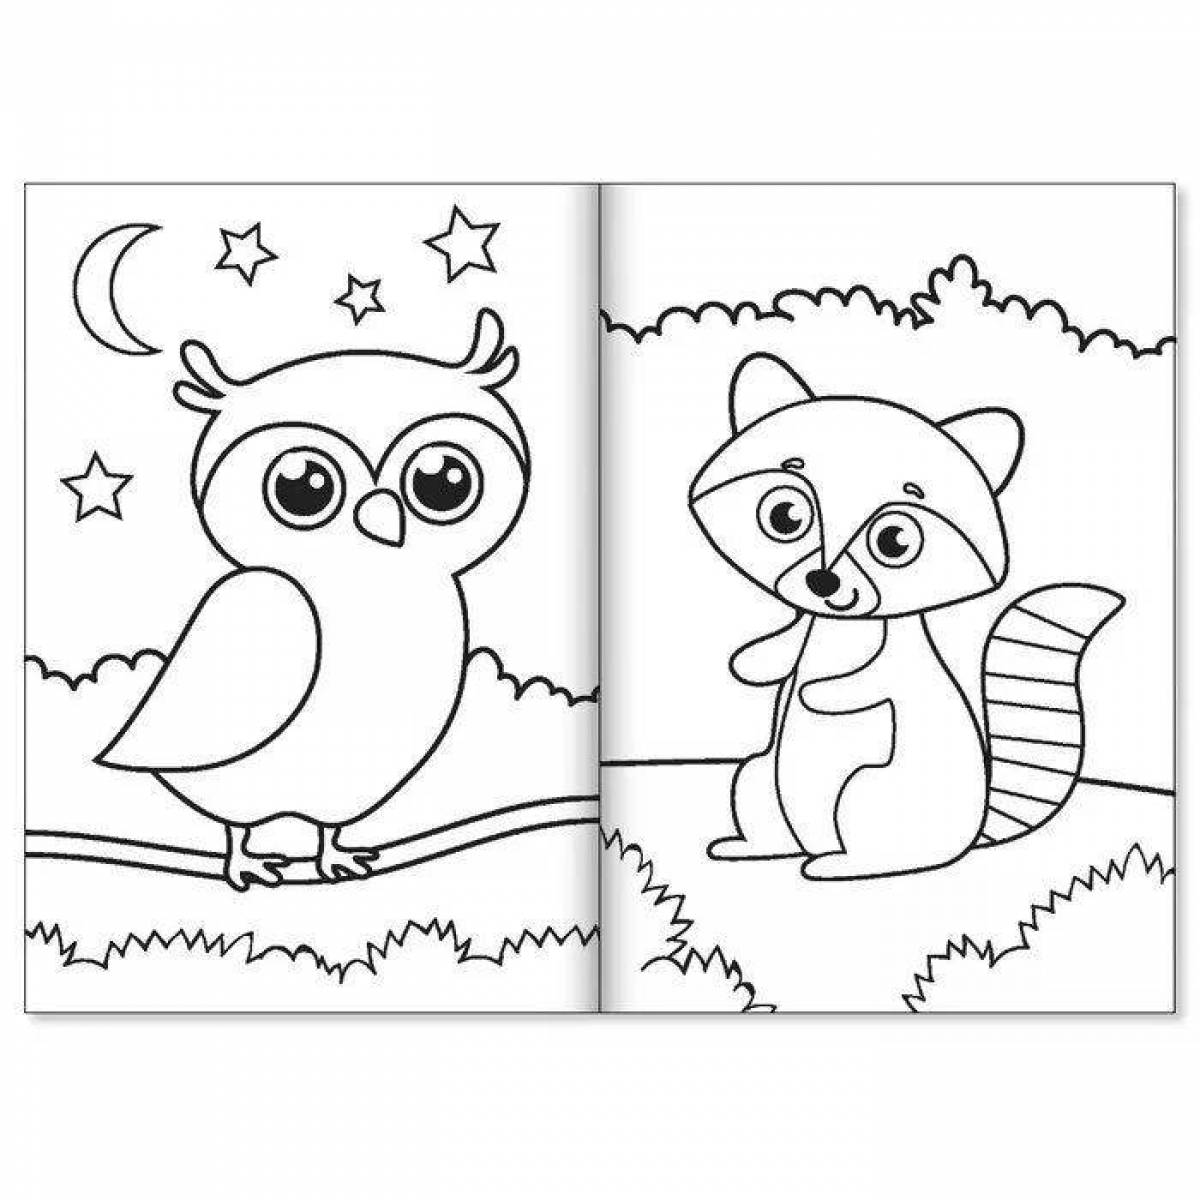 Creative selection of coloring pages